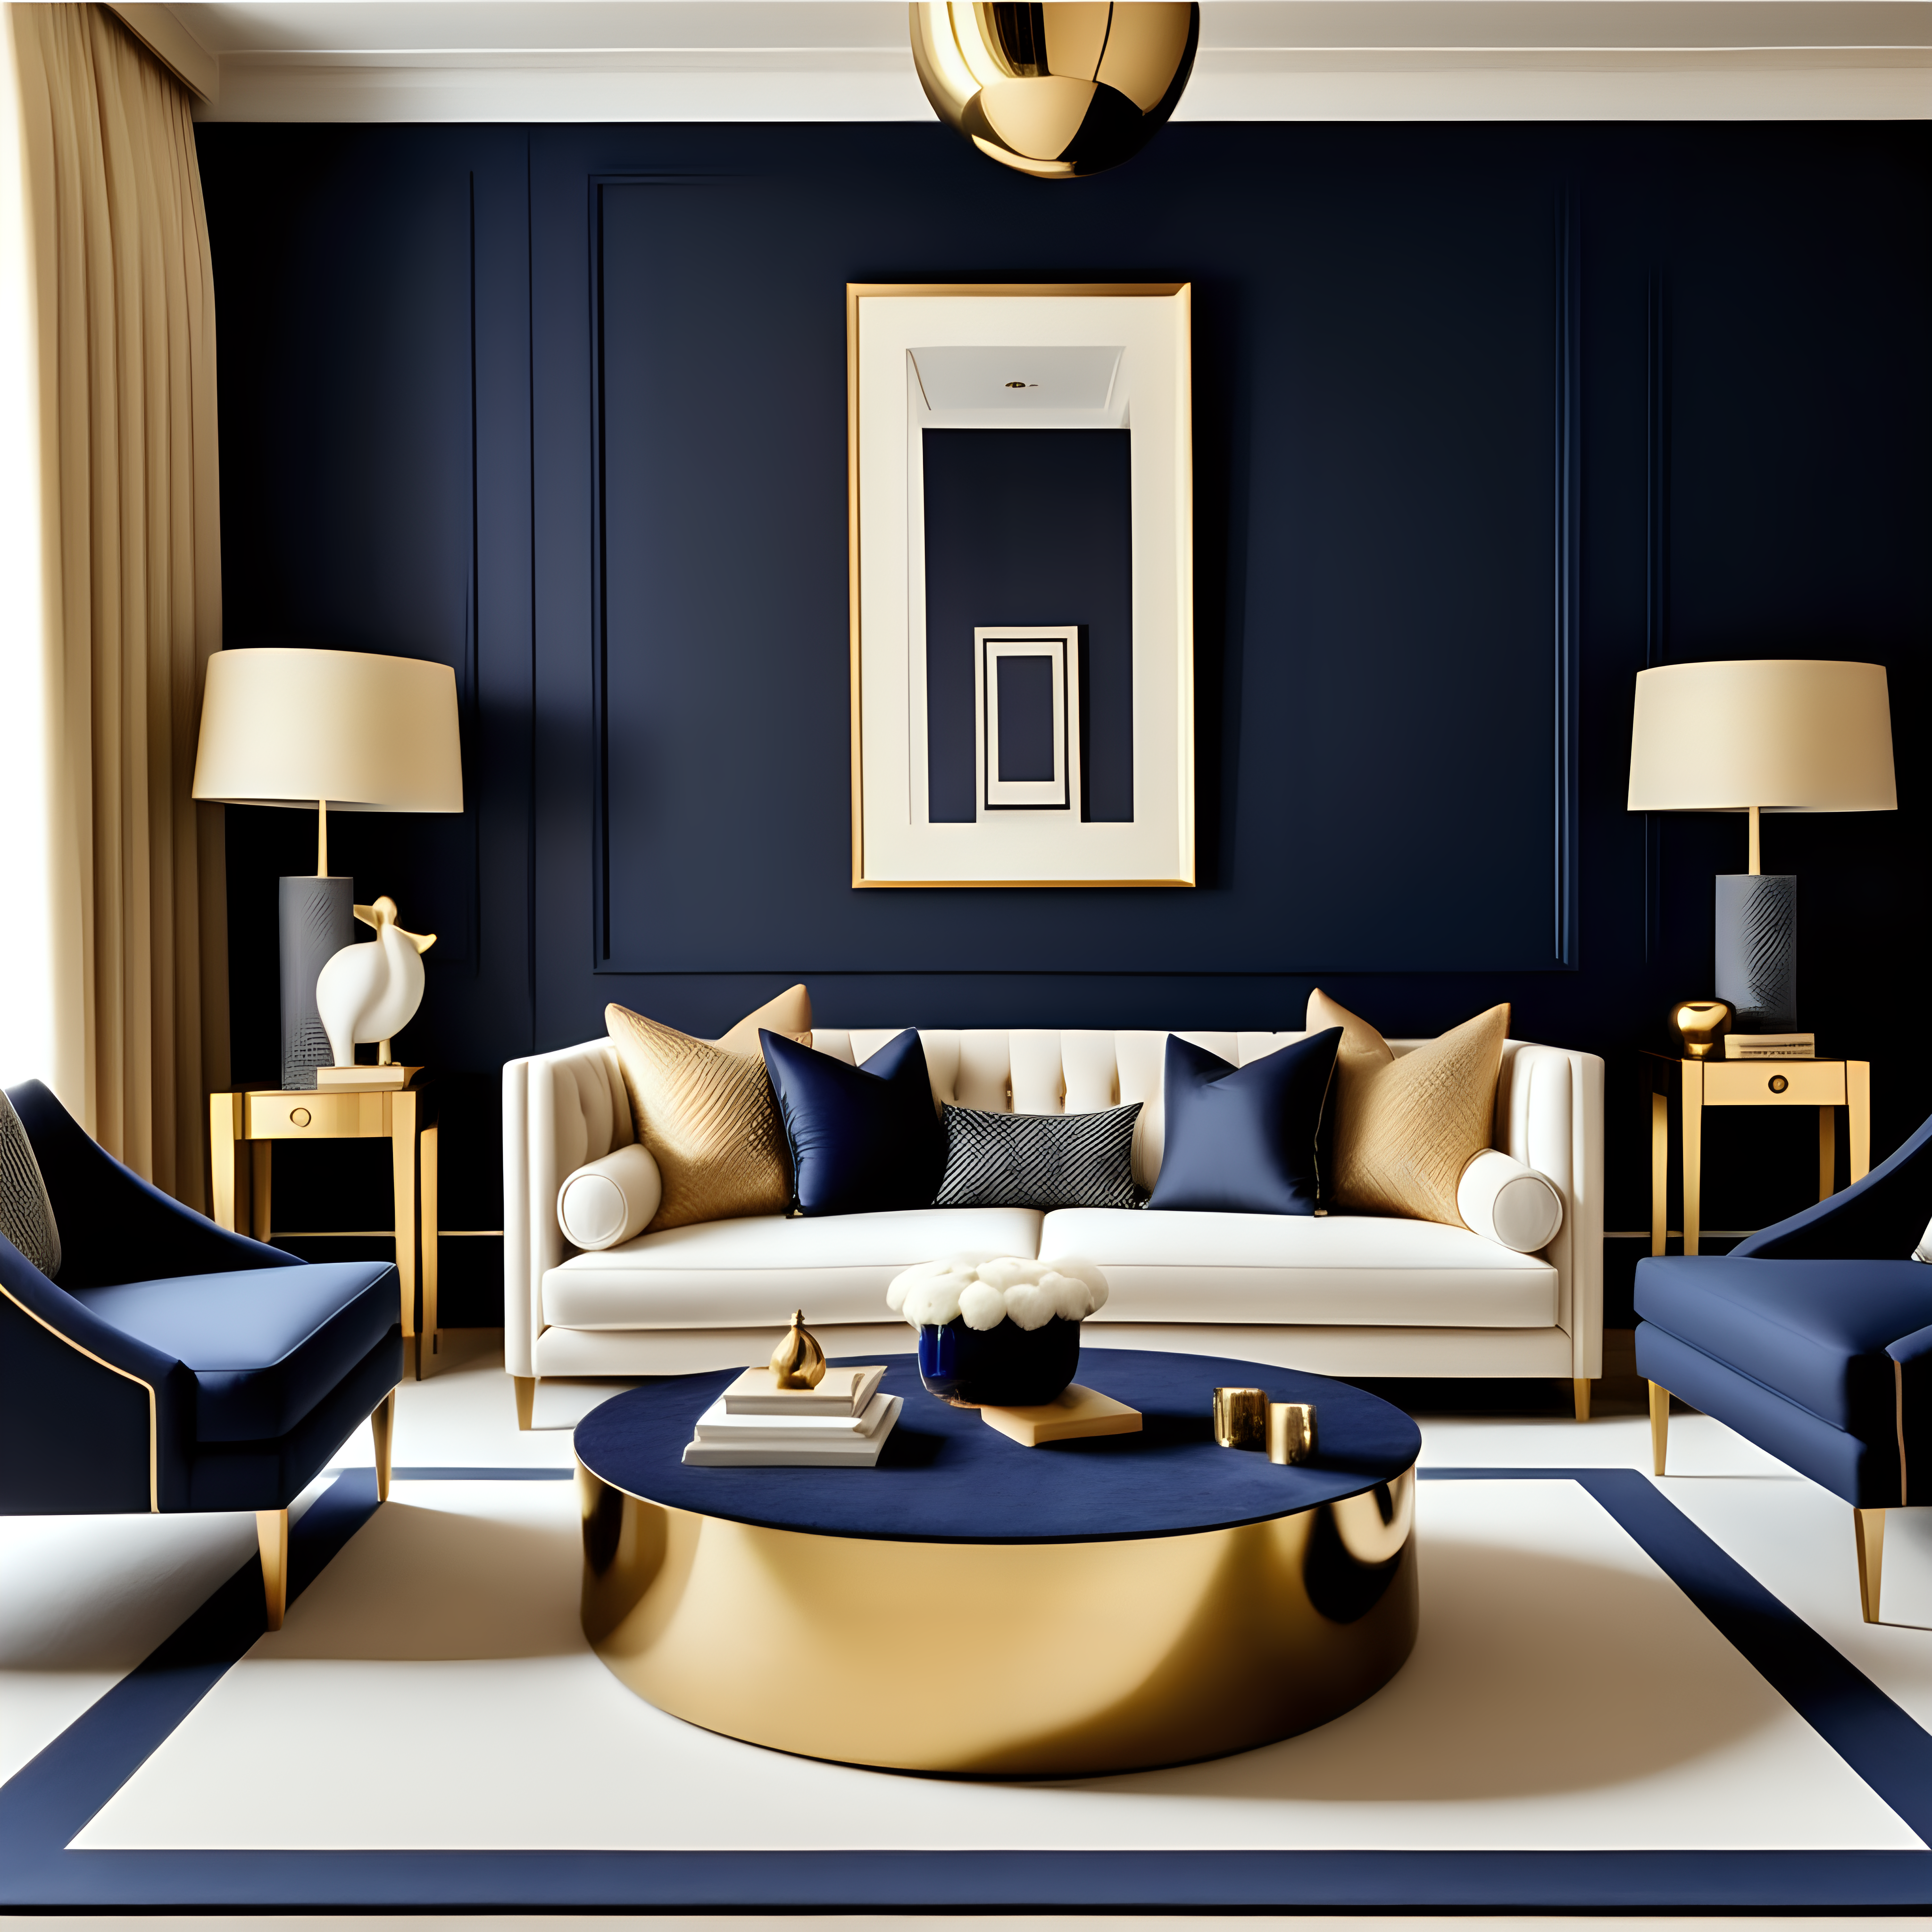 The image presents a chic and contemporary living room, only sofa and carpet, with gold, navy blue and cream vibe.